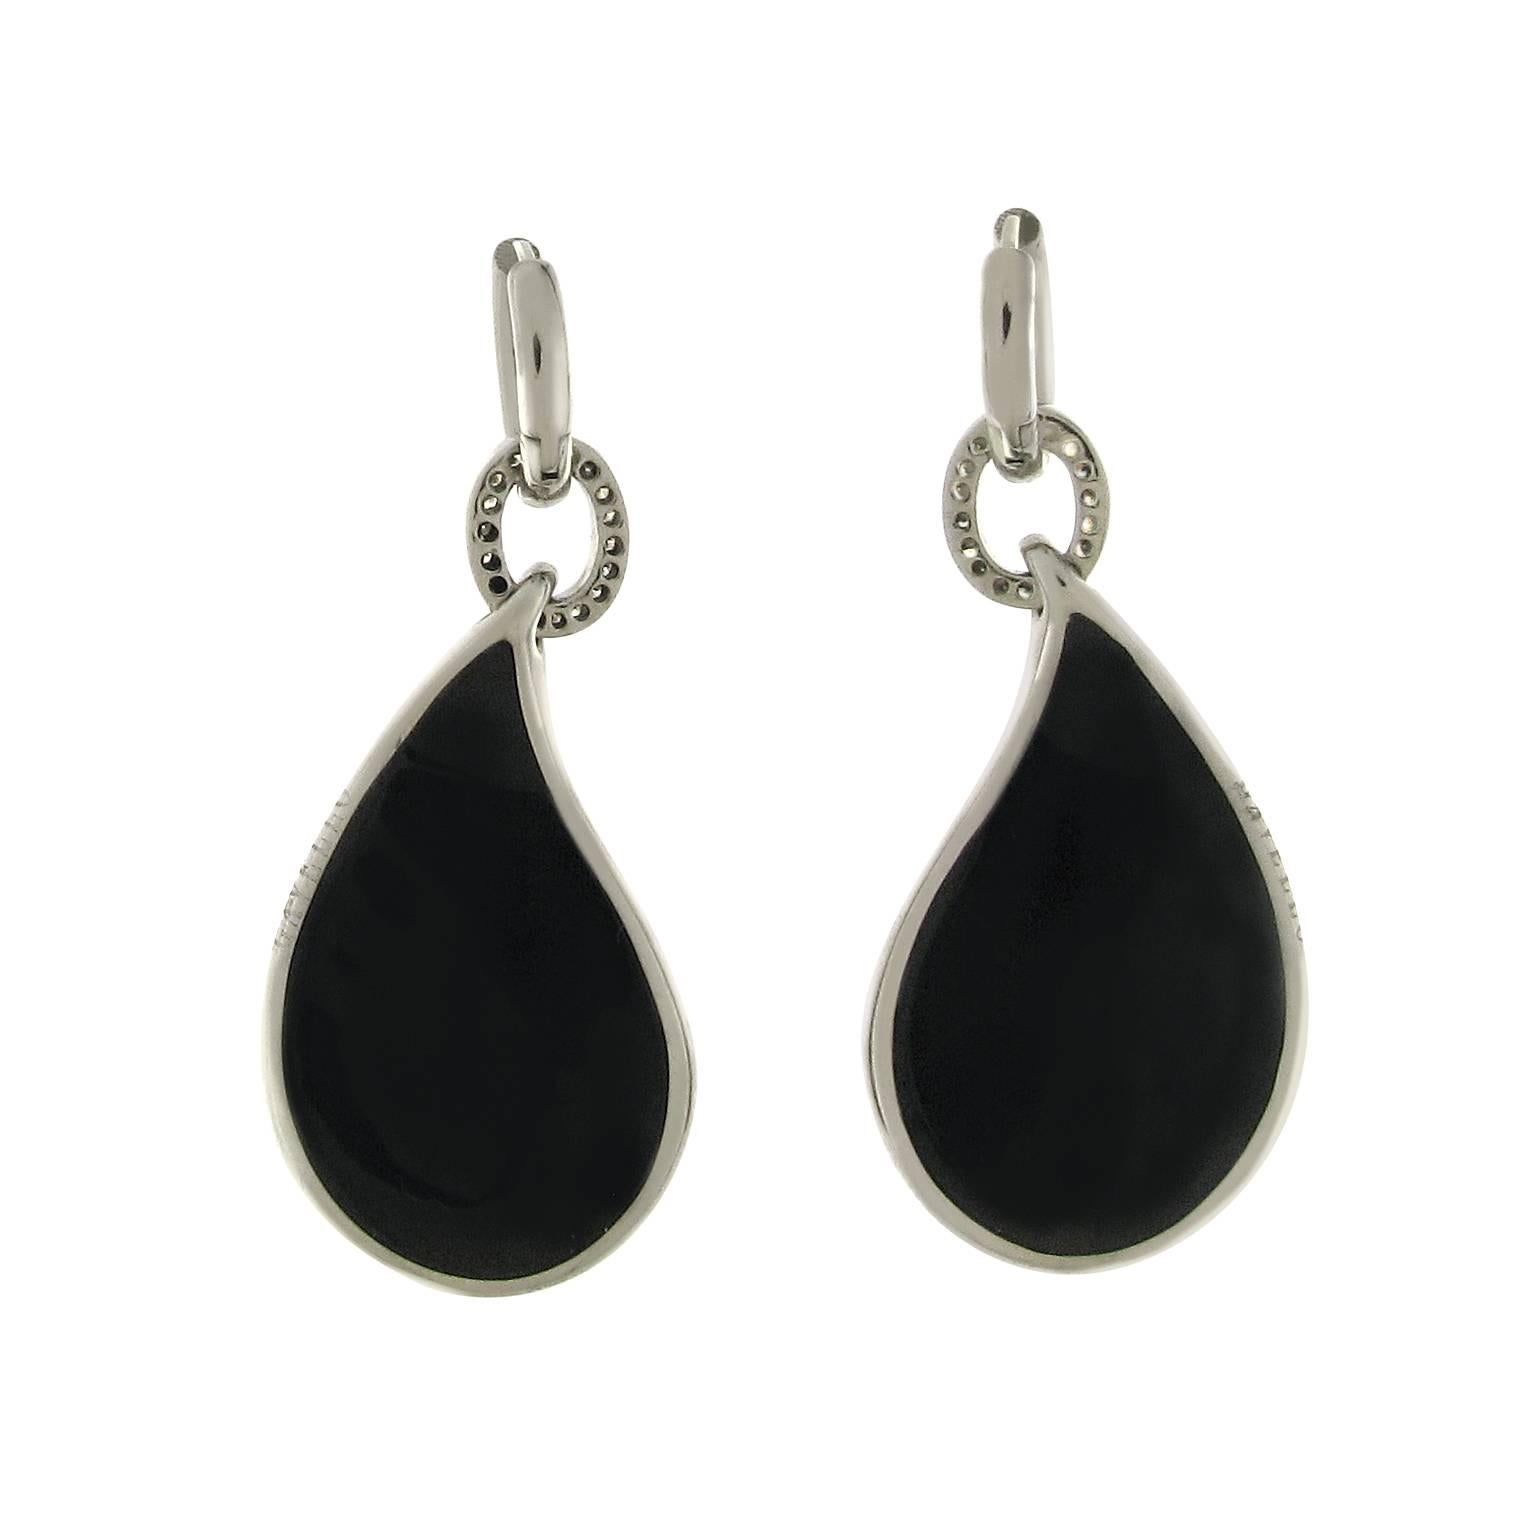 Timeless contemporary evil-eye sculptured dangle earrings in 18k white gold. The jewels feature a black and white diamond and tanzanite pavé setting. Total diamond weight is 6.56ct. The earrings are lined with onyx essenza. Signed and hallmarked